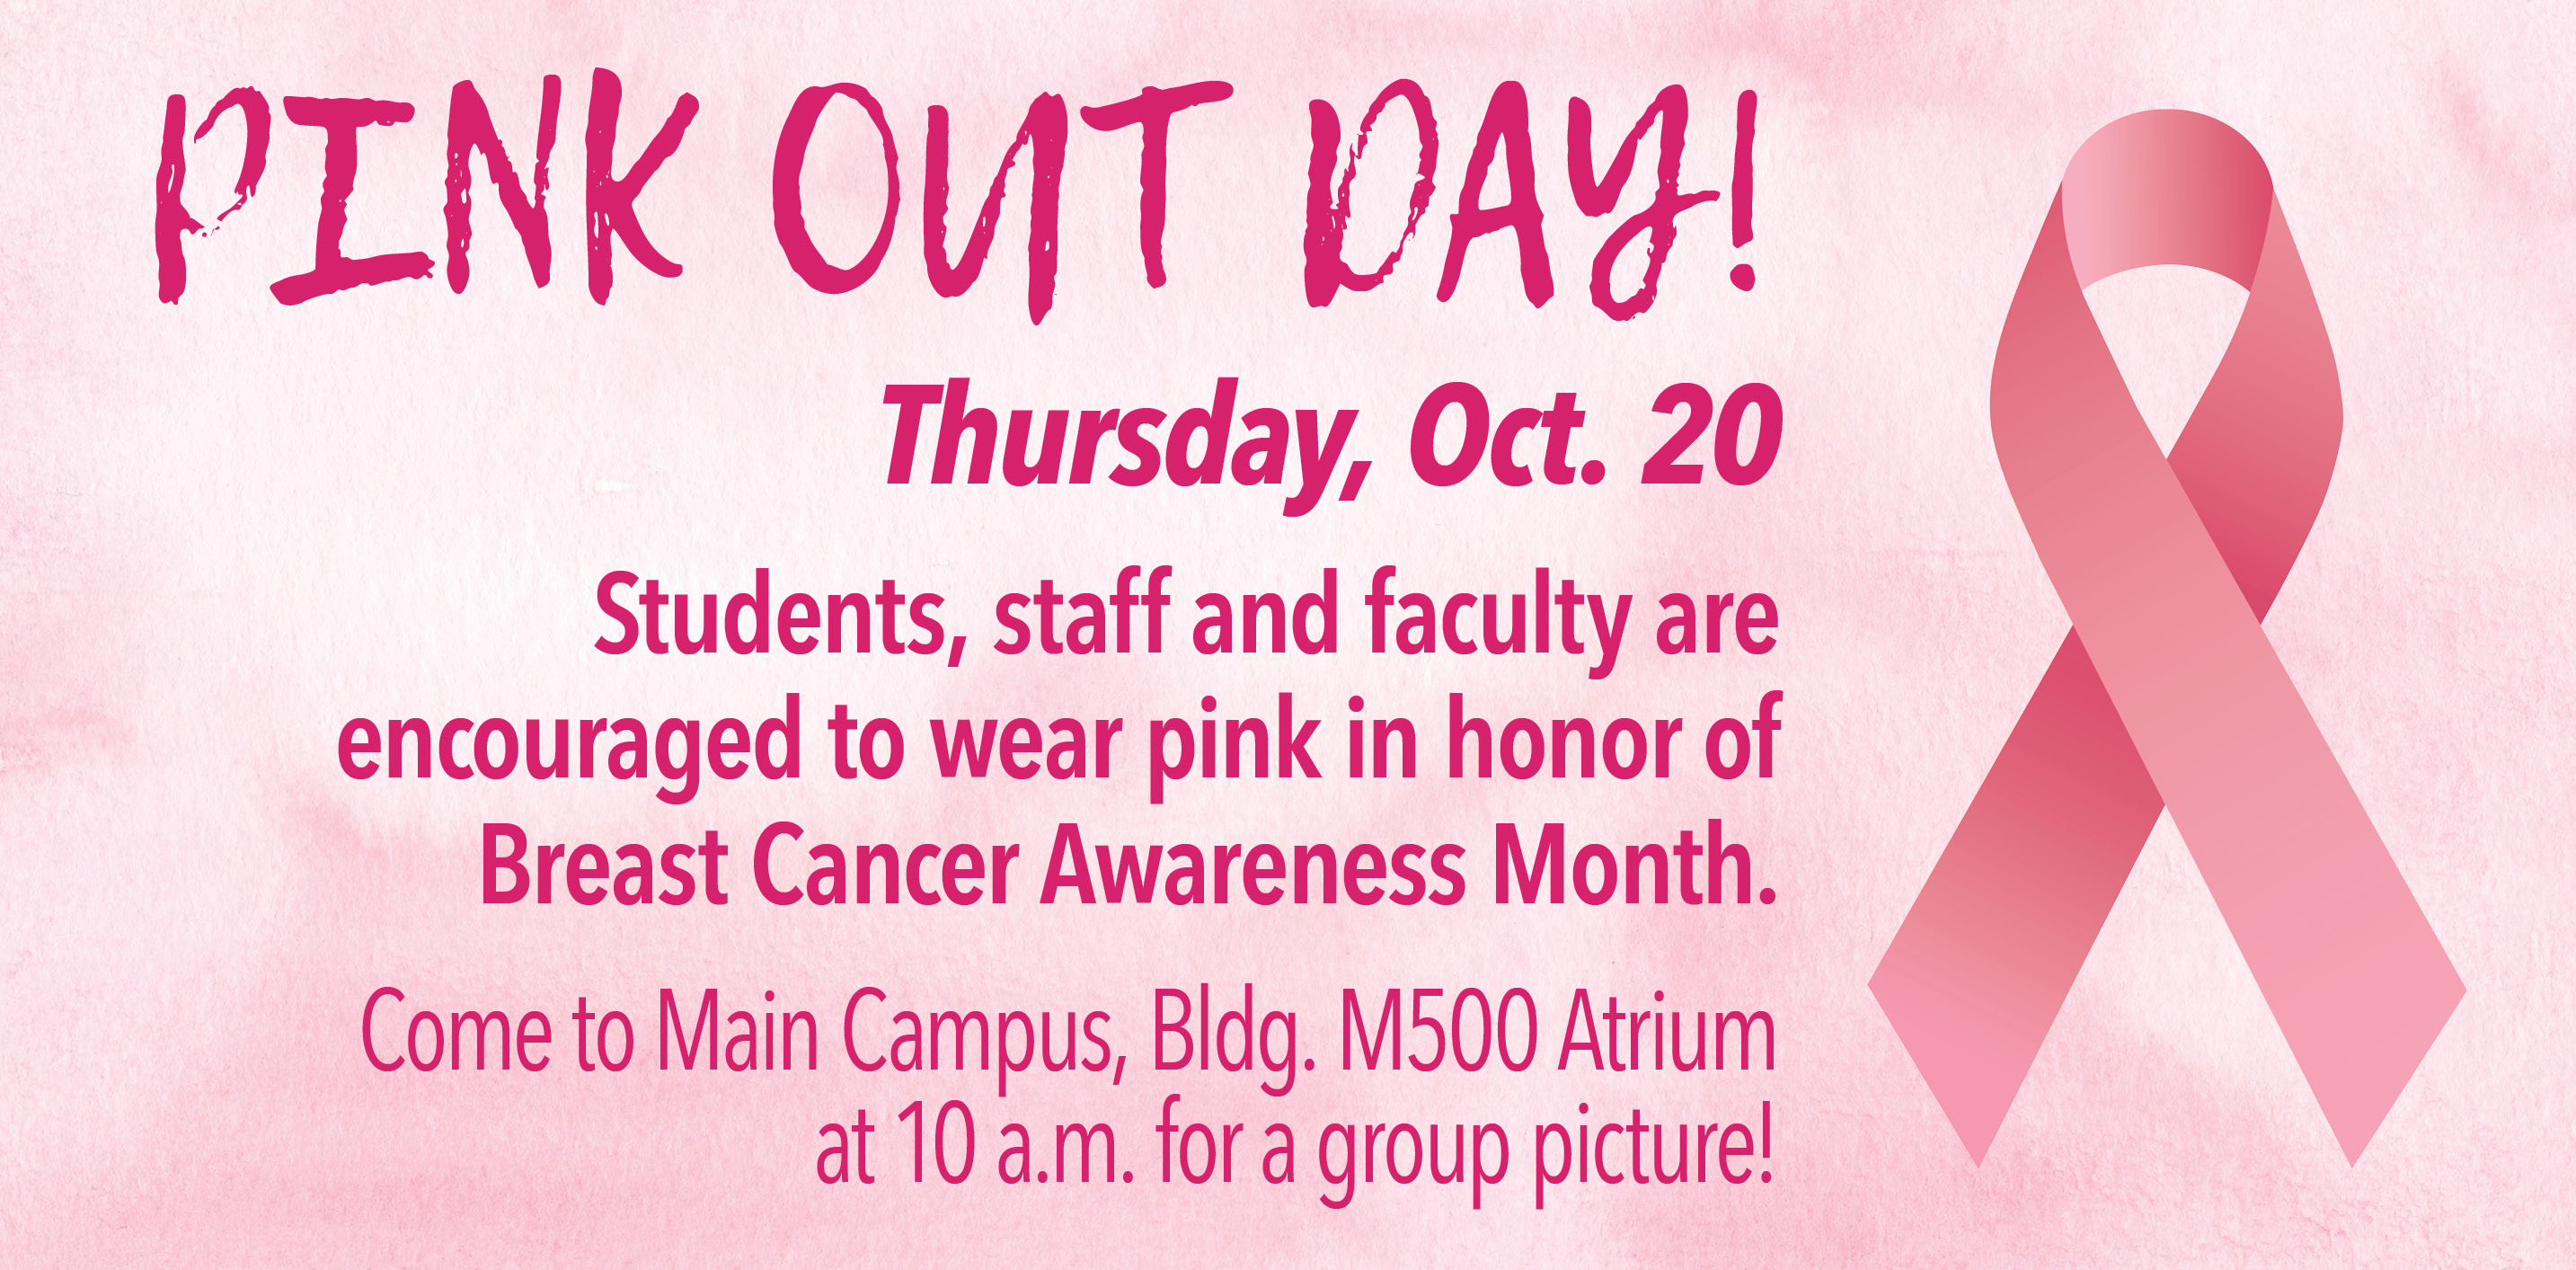 Pink Out Day